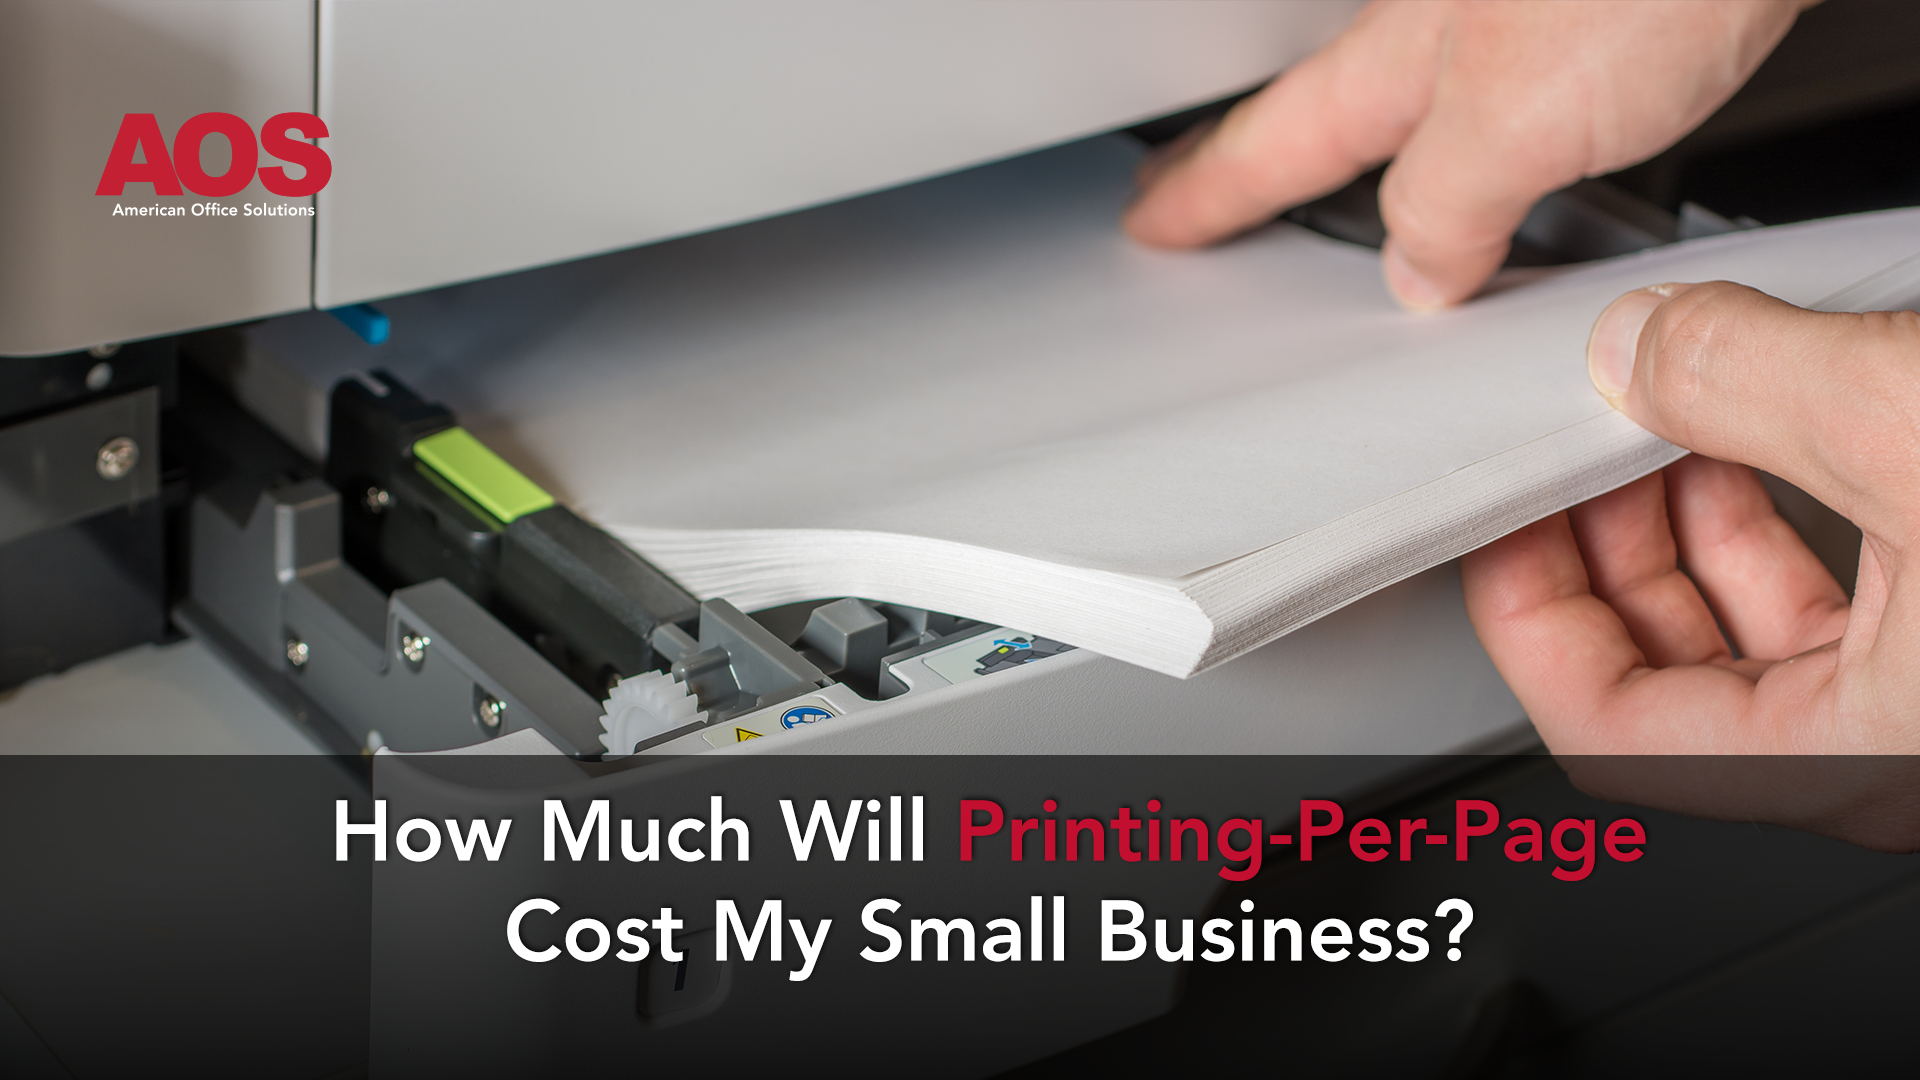 How Much Will Printing-Per-Page Cost My Business?